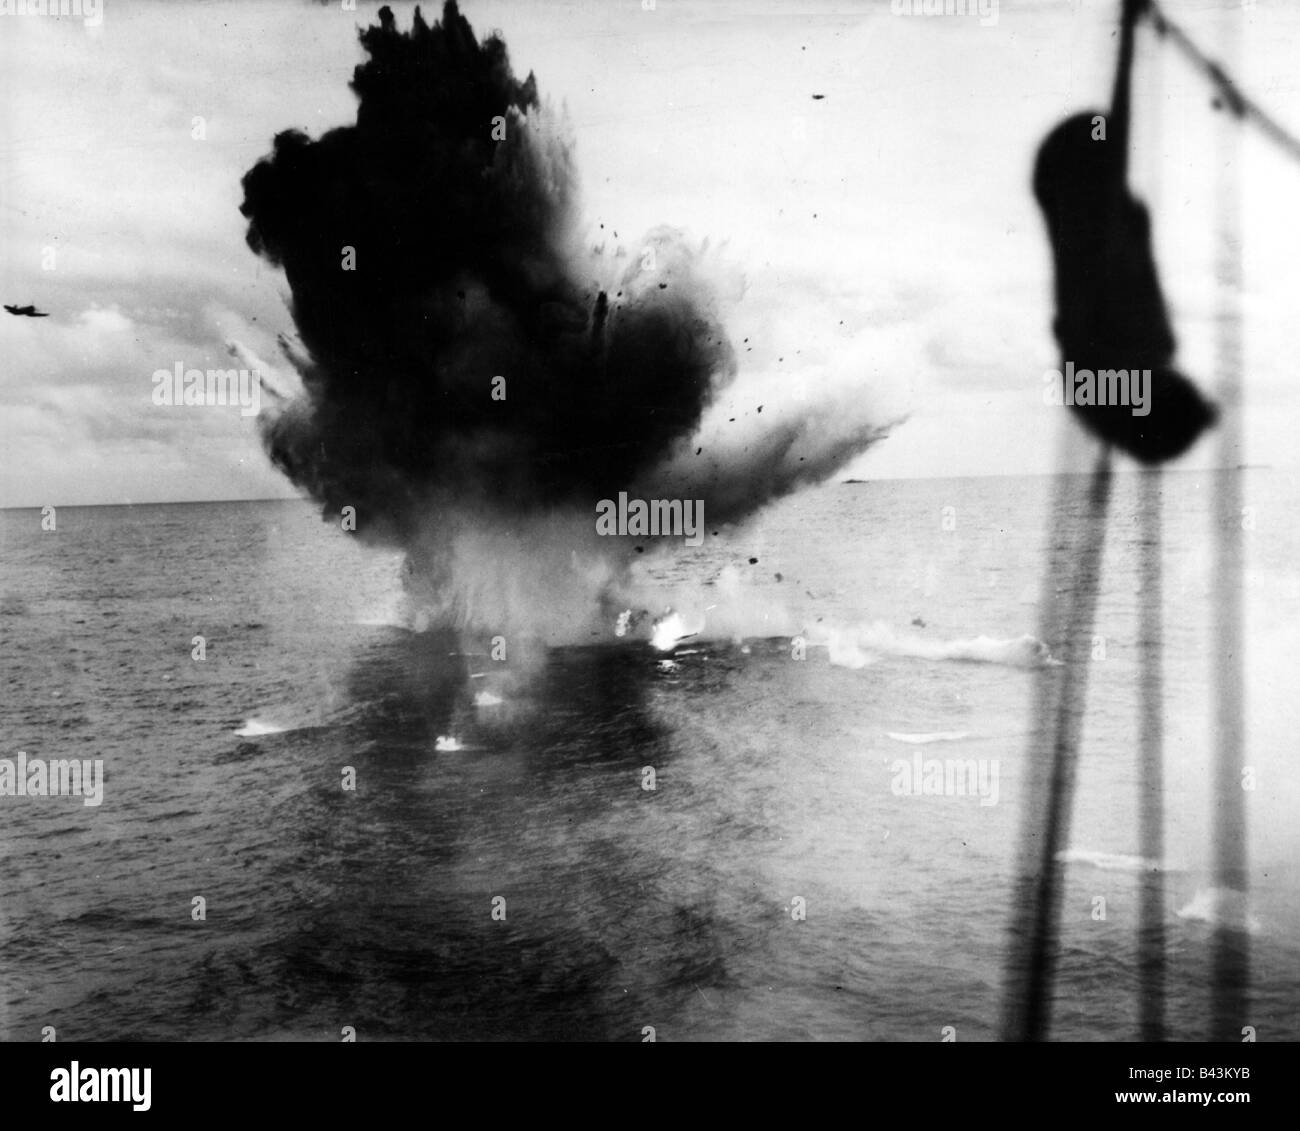 events, Second World War / WW II, Pacific, naval warfare, Japanese Kamikaze aircraft missing its target and crashing in the water, 1945, Stock Photo